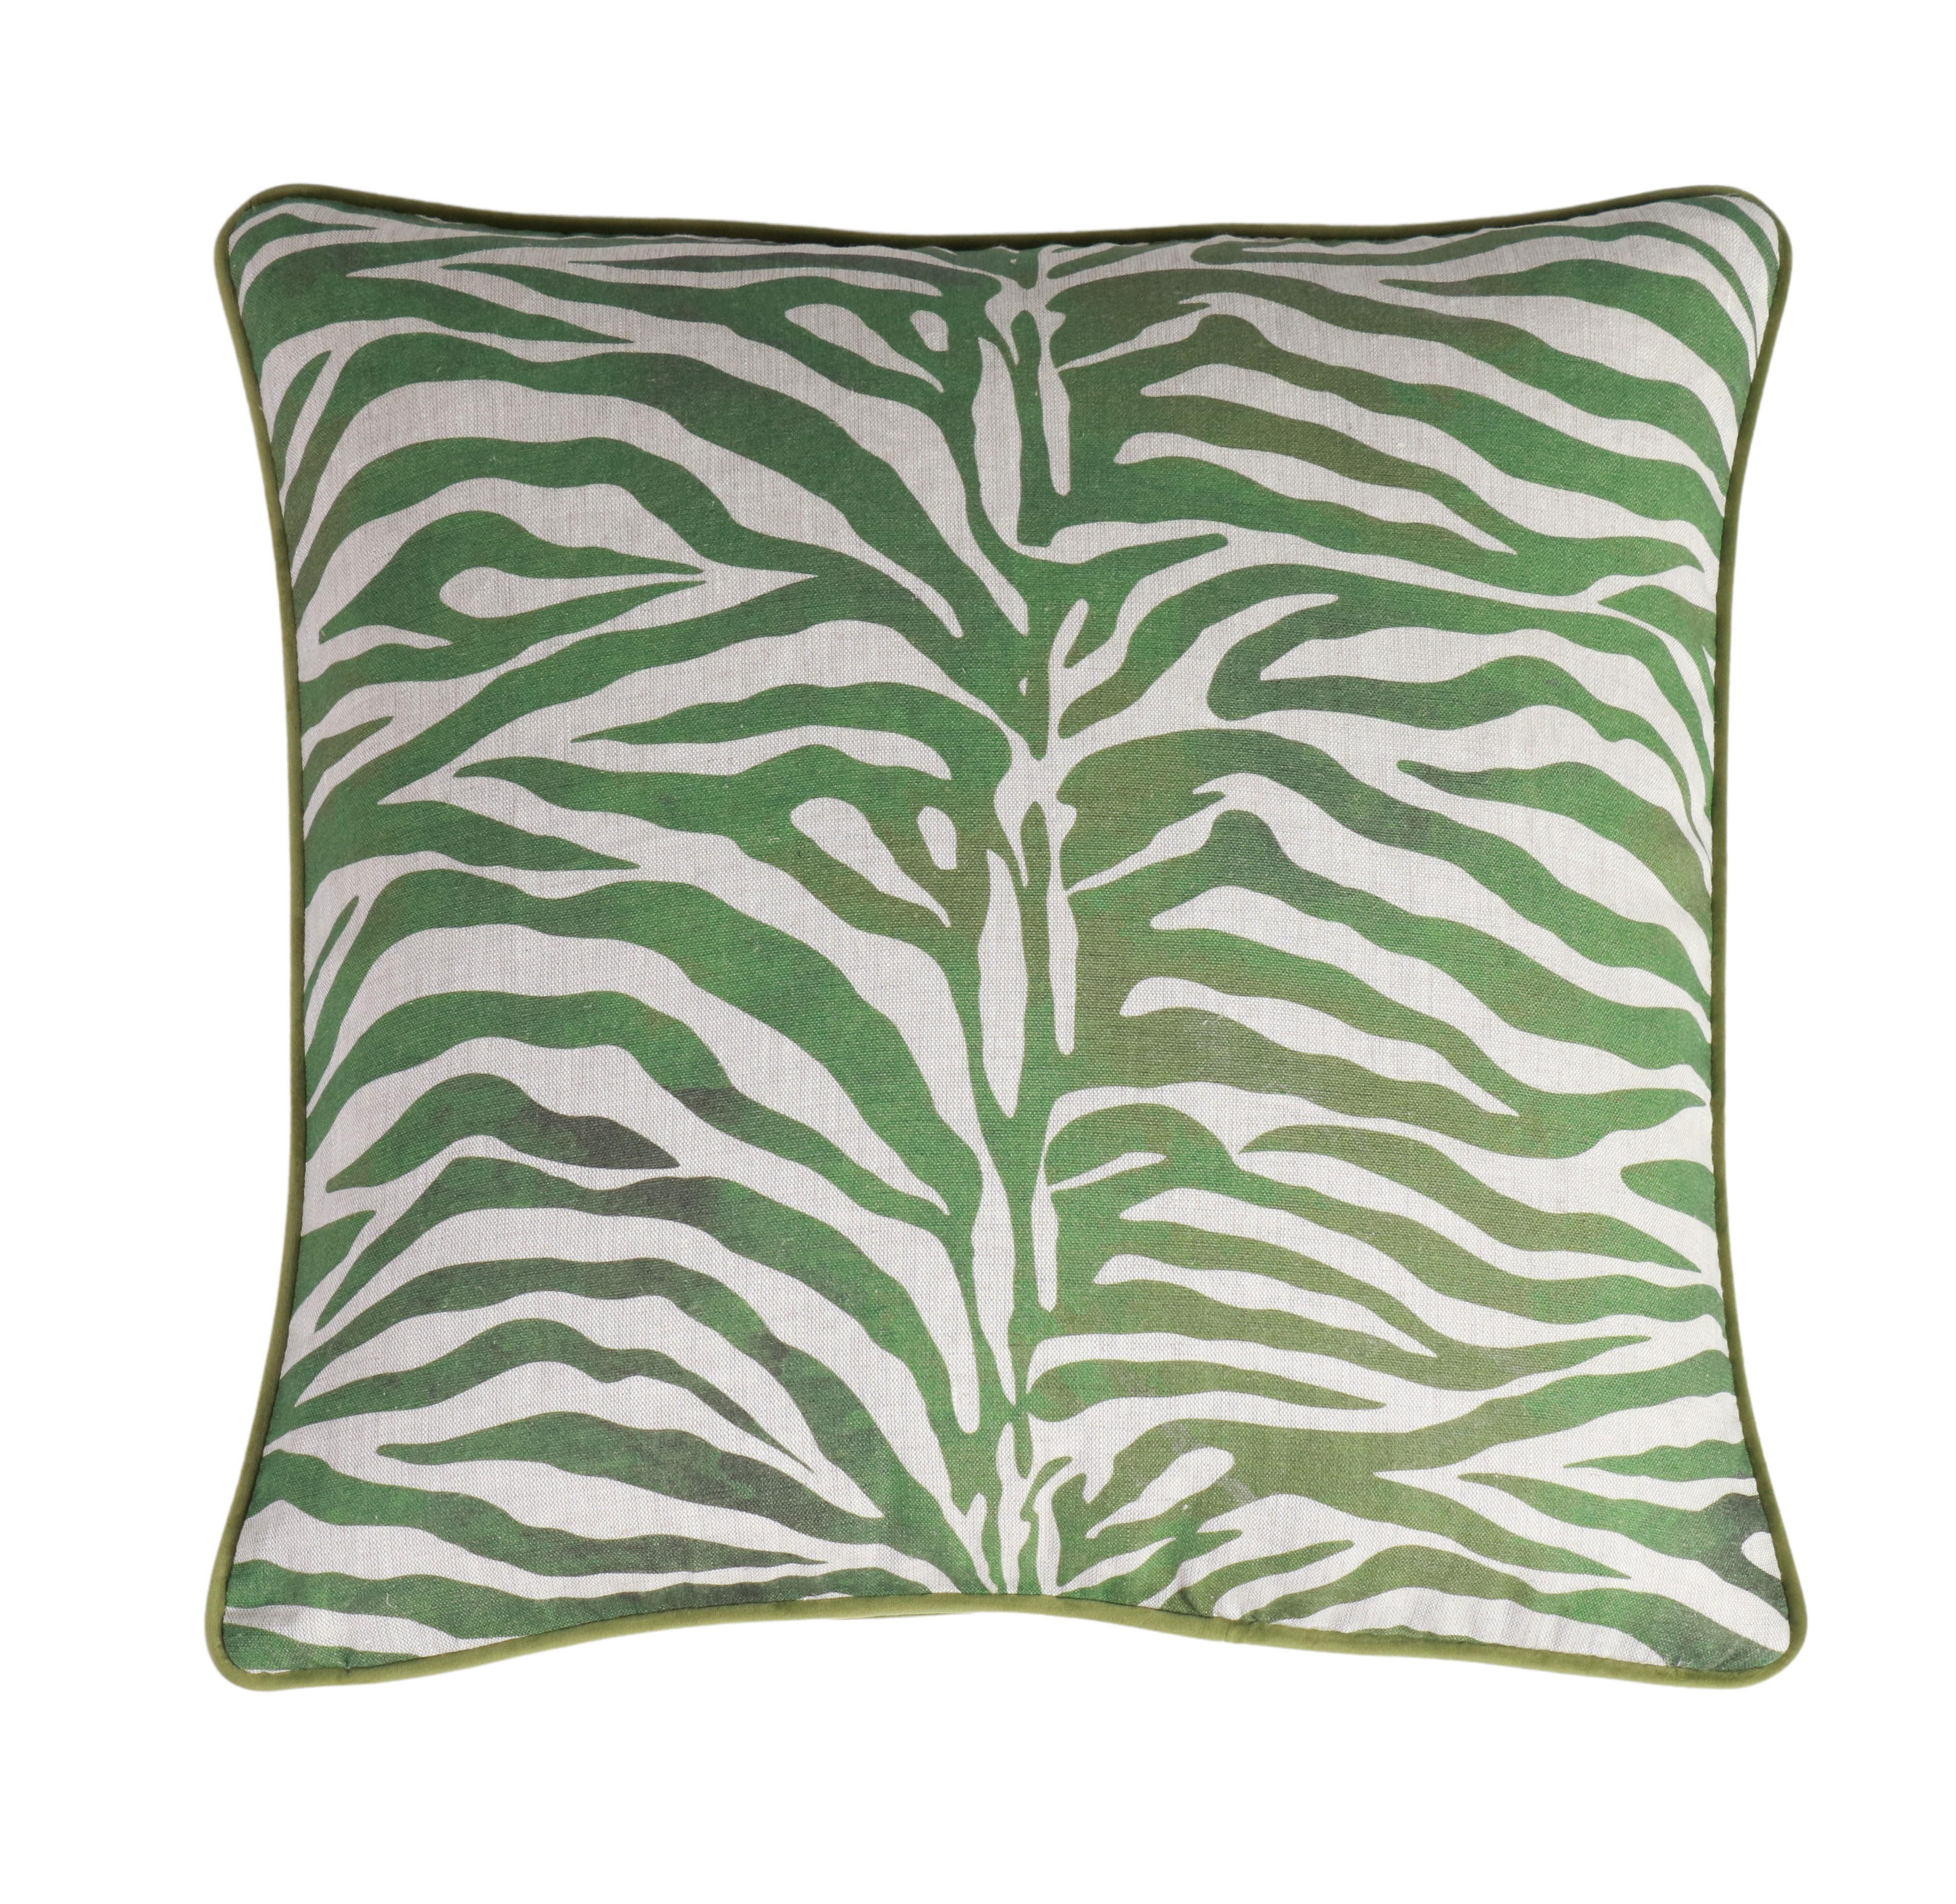 Emerald green tiger print cushion with velvet backing